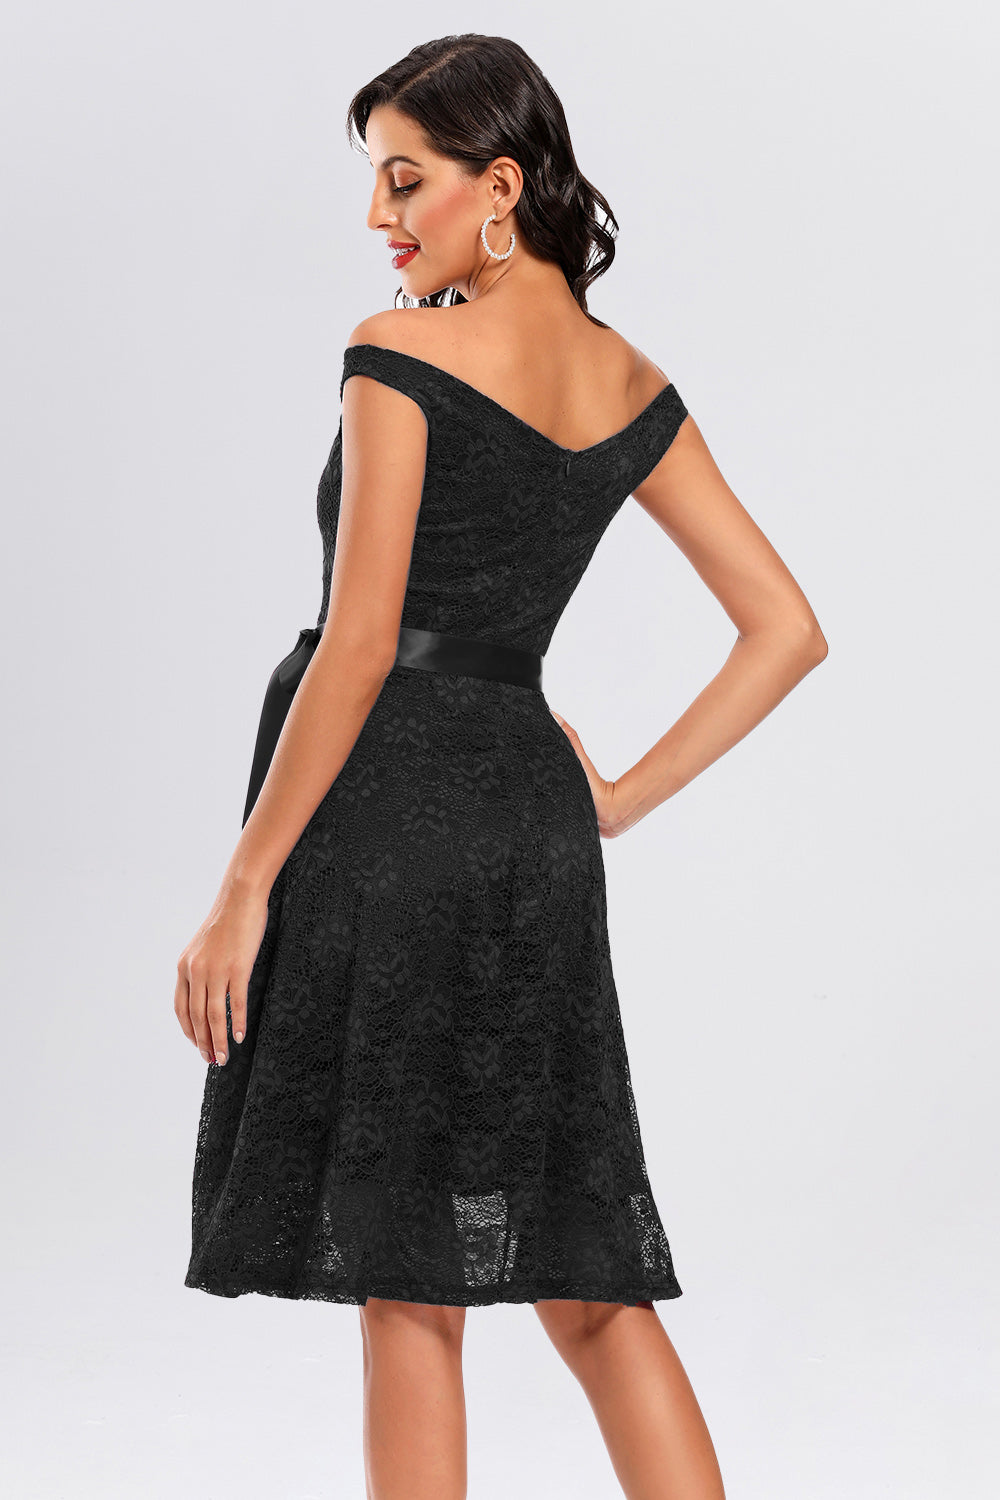 Backless Lace Off the Shoulder Homecoming Dresses